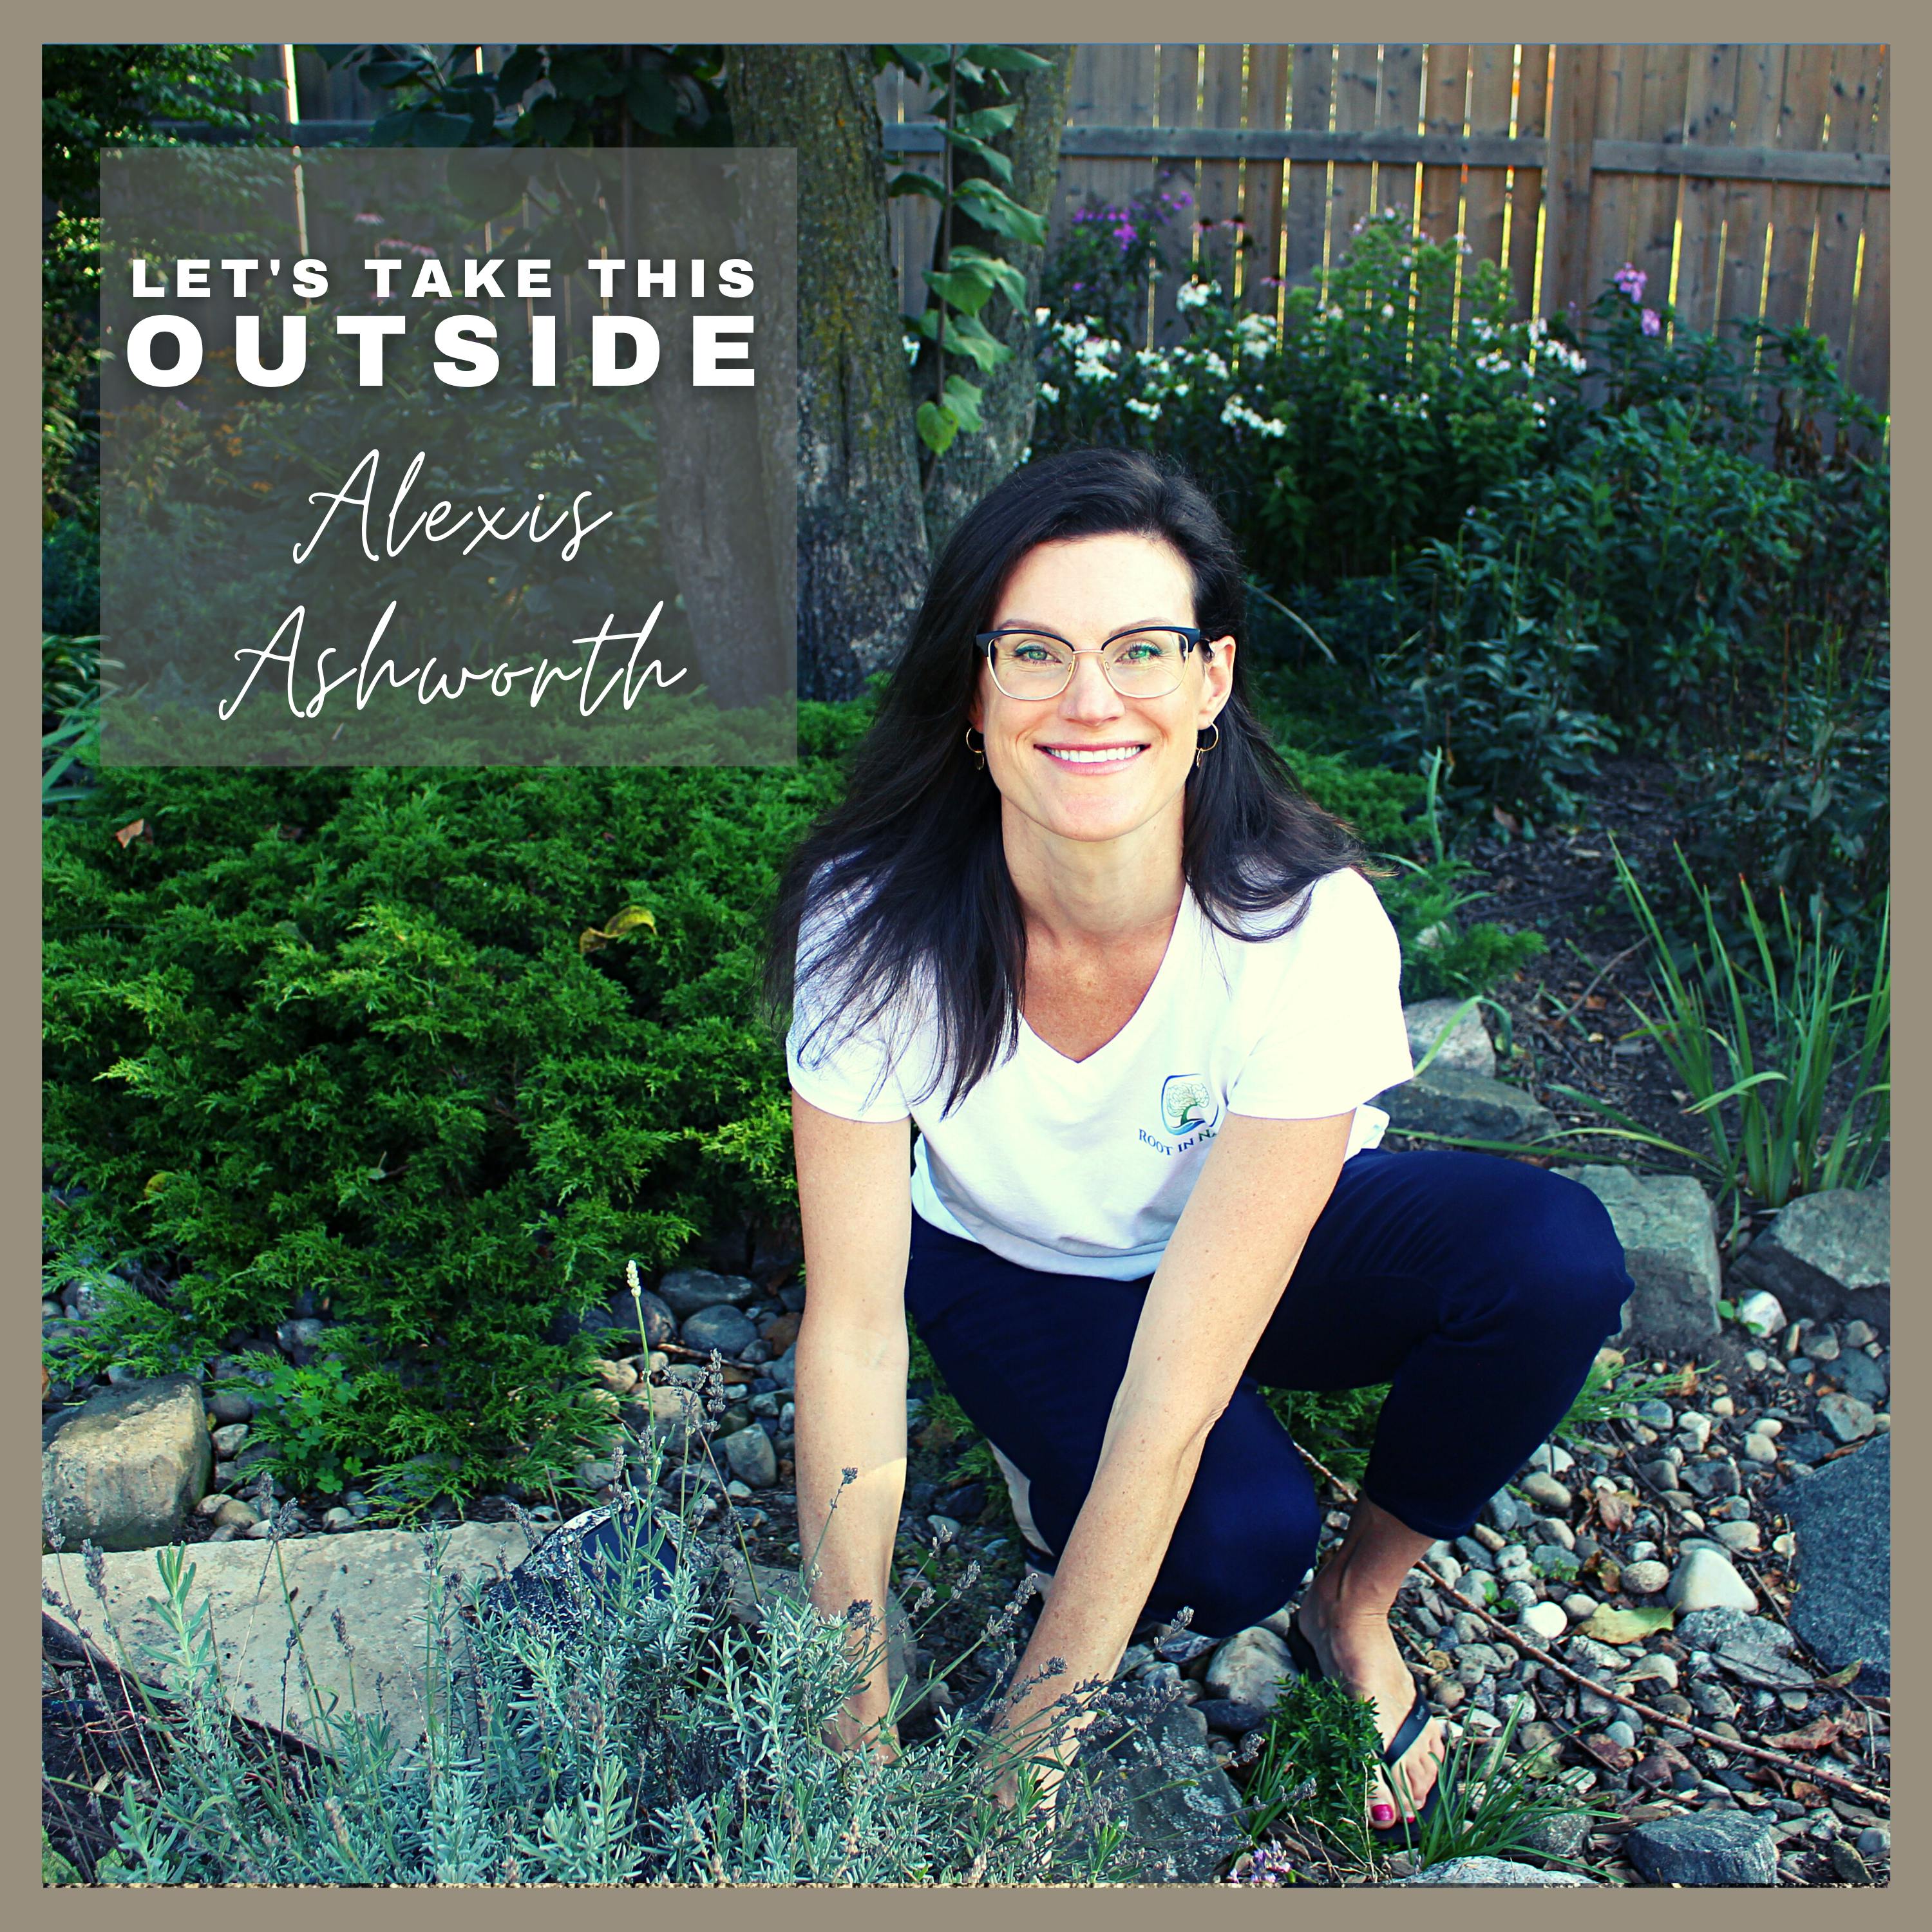 Alexis Ashworth - Founder of Root in Nature